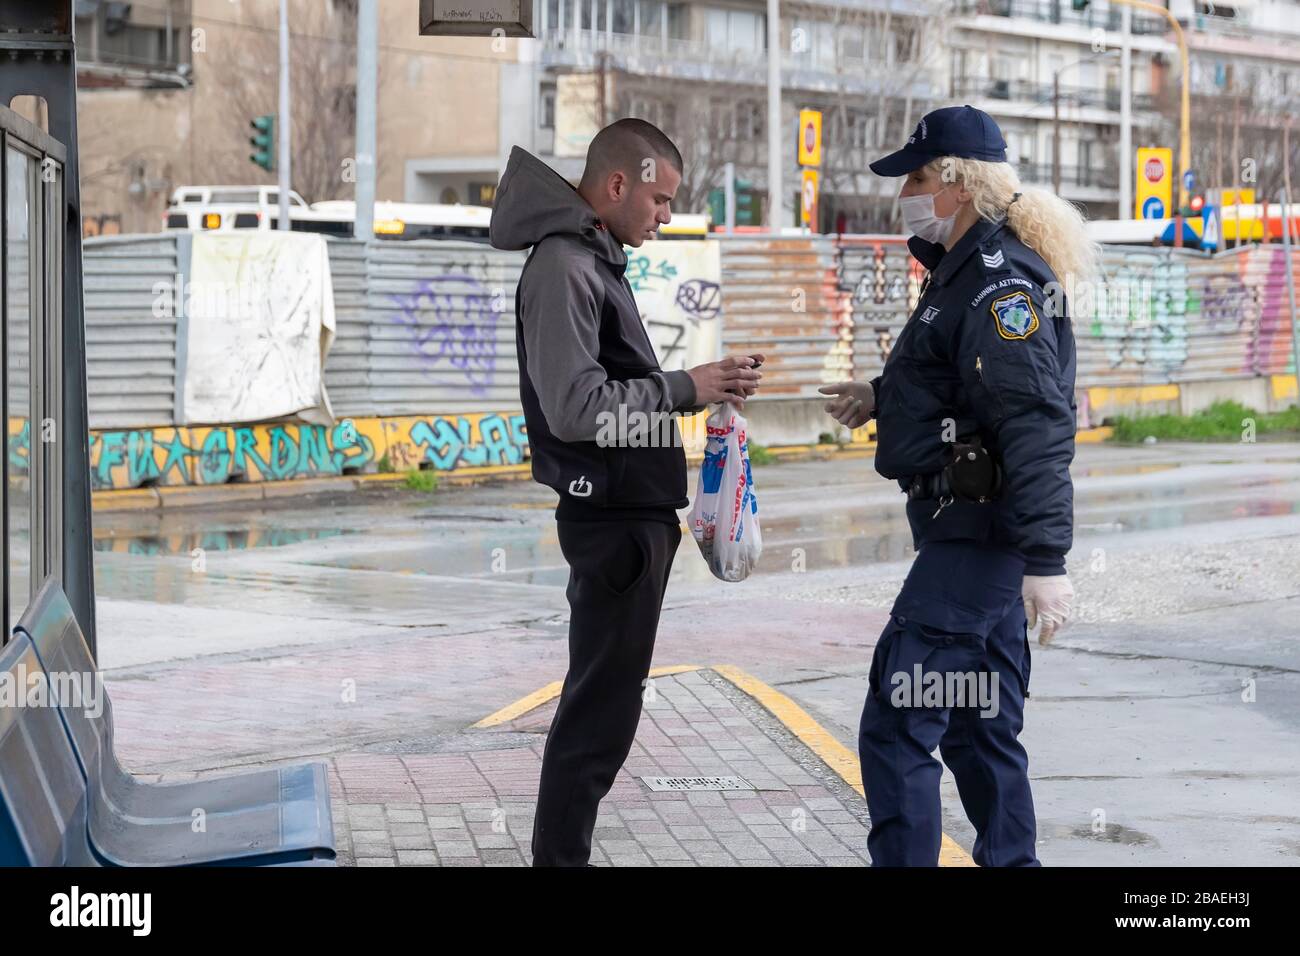 Thessaloniki, Greece - March 23, 2020: A police officer checks the documents of a citizen, as the country struggles to control the spread of the COVID Stock Photo